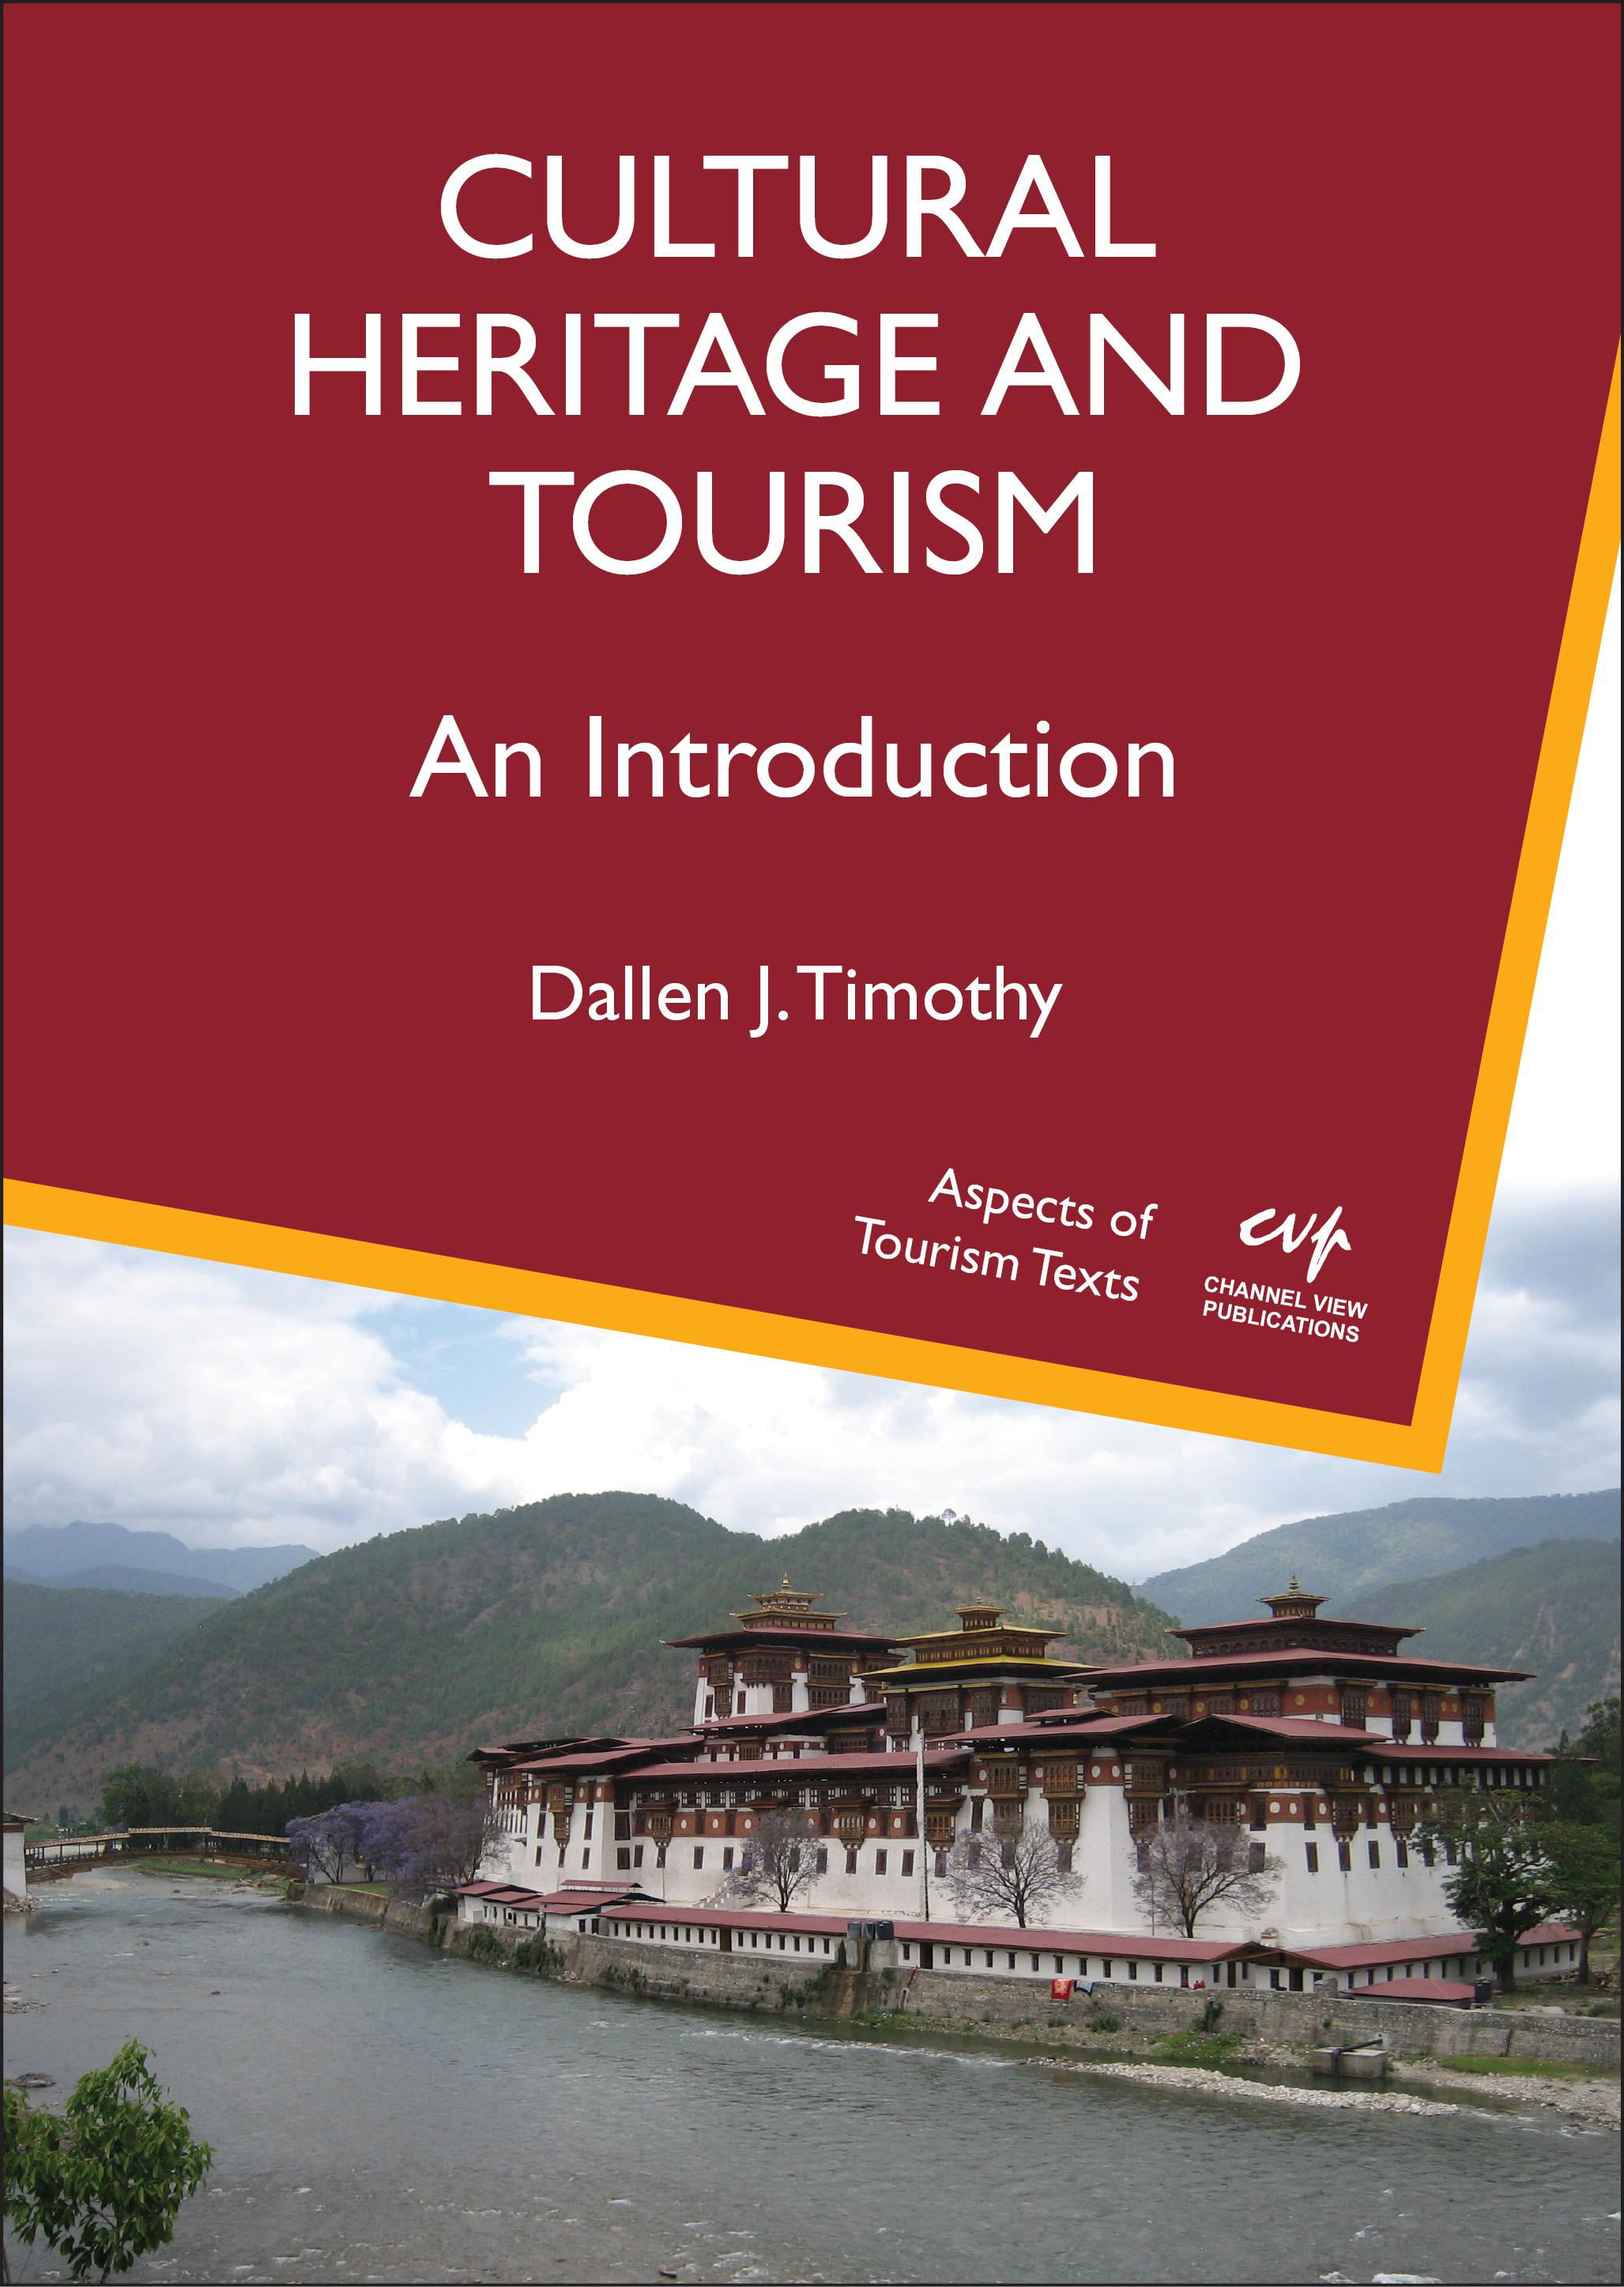 tourism books about